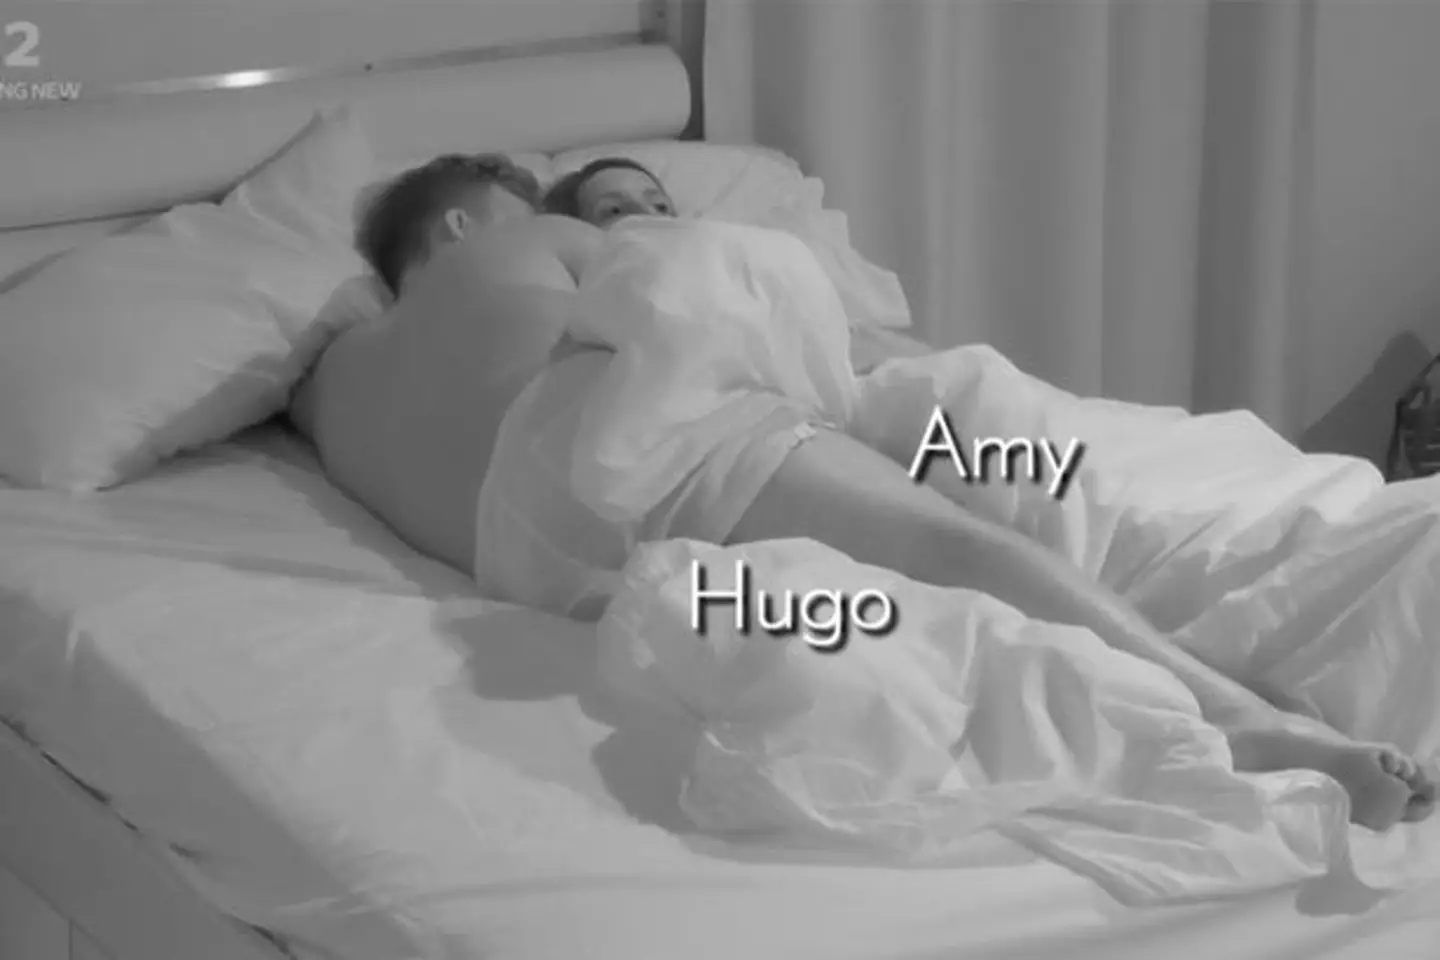 Fans thought Amy was unimpressed during their bed session (